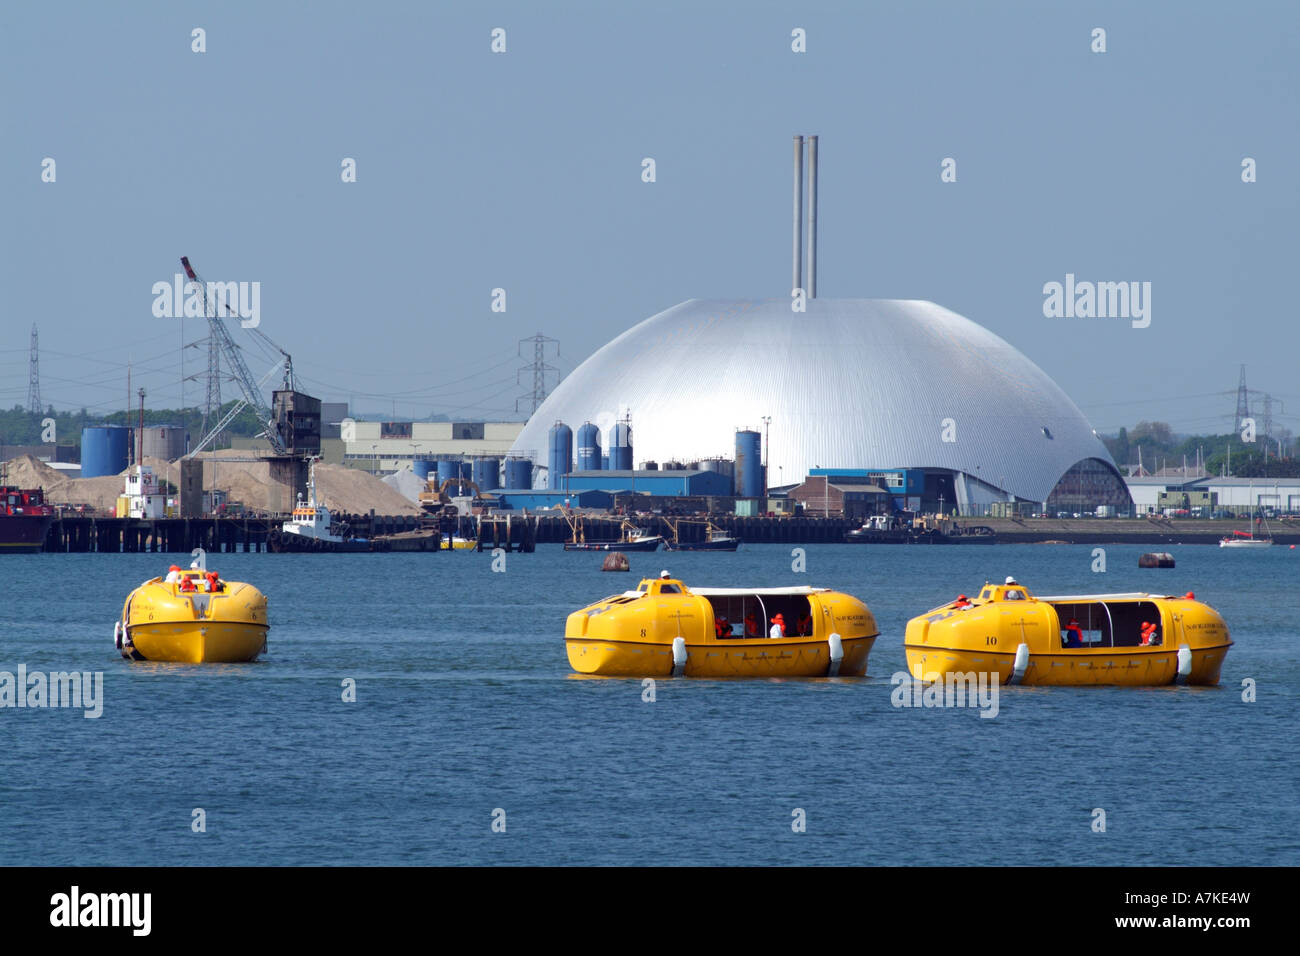 Waste disposal plant. Dome and lifeboats on Southampton Water England UK Stock Photo